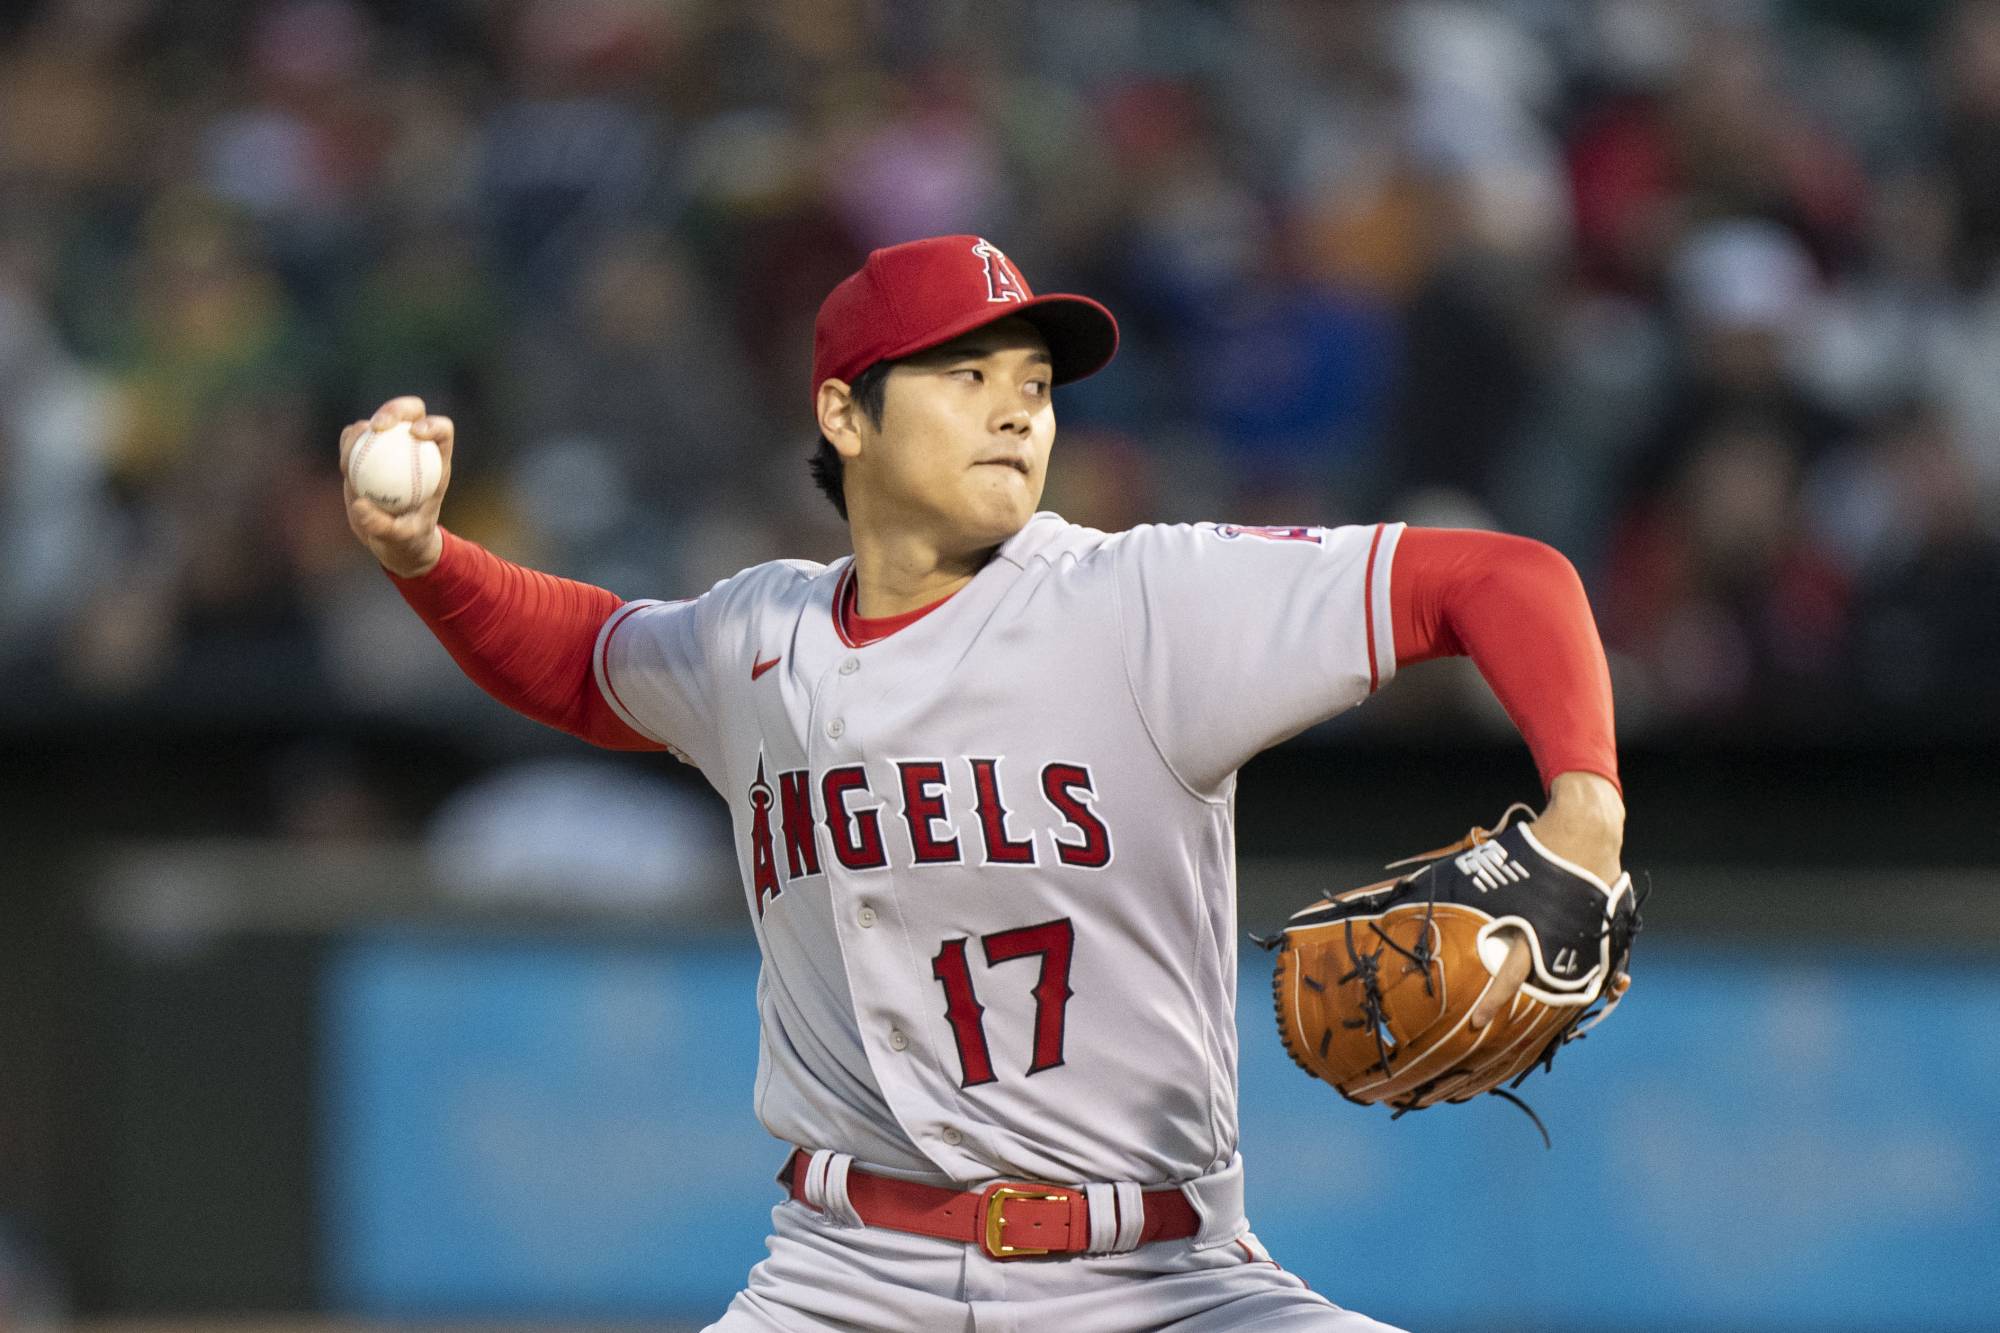 Angels starting pitcher Shohei Ohtani delivers a pitch against the Oakland Athletics during a game at RingCentral Coliseum in Oakland, California, on Thursday. | USA TODAY/ VIA REUTERS